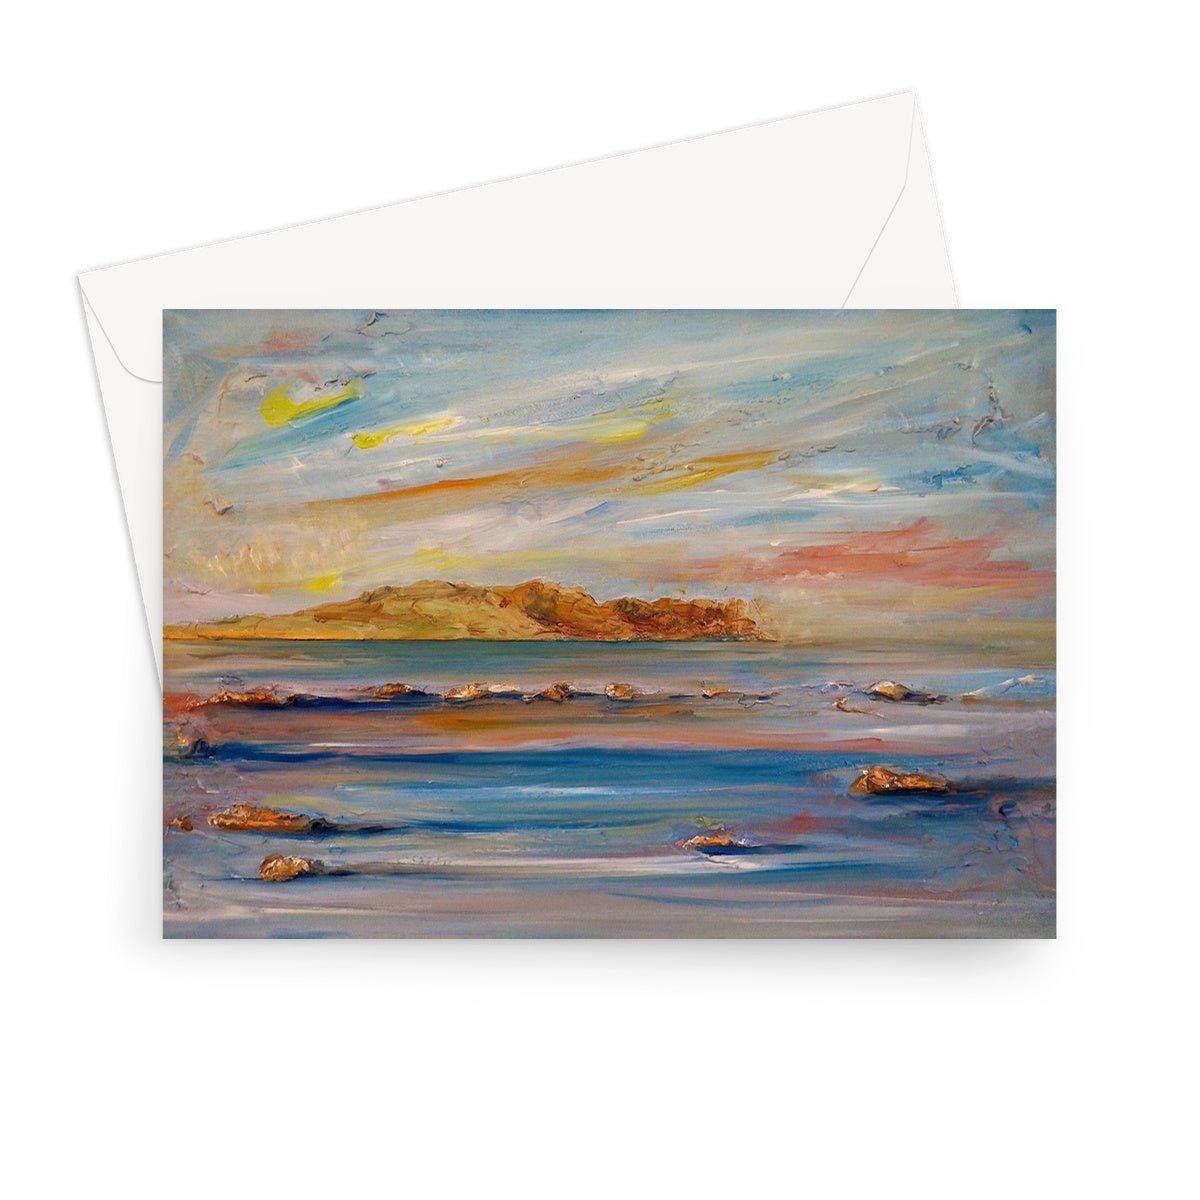 Tiree Dawn Art Gifts Greeting Card-Greetings Cards-Hebridean Islands Art Gallery-7"x5"-1 Card-Paintings, Prints, Homeware, Art Gifts From Scotland By Scottish Artist Kevin Hunter